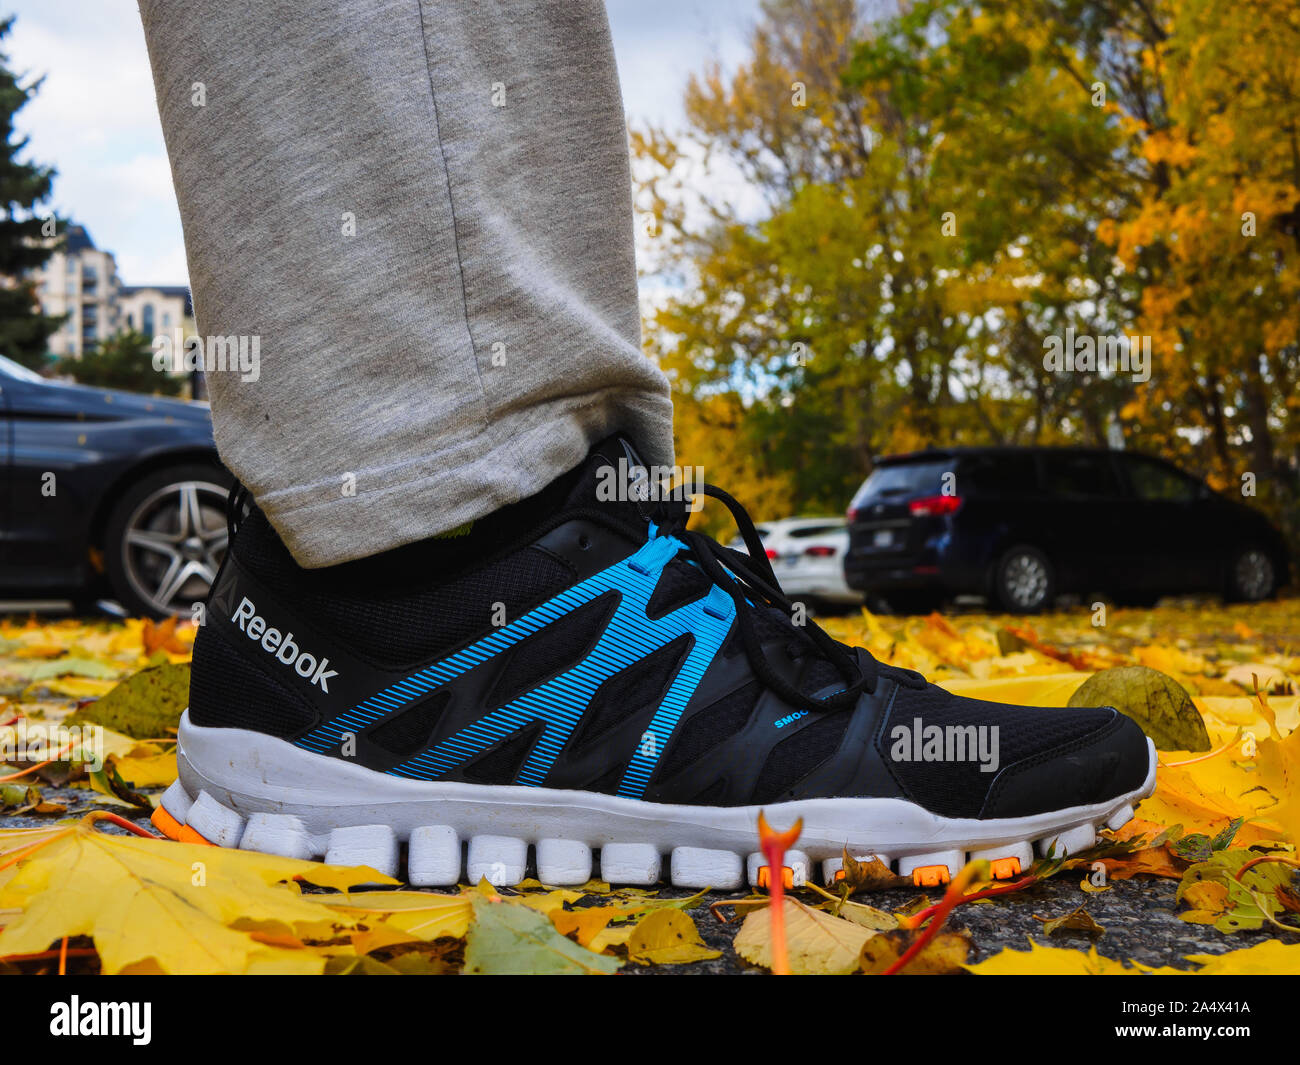 Reebok RealFlex 4 running shoes stepping around yellow leaves on the ground  in autumn Stock Photo - Alamy